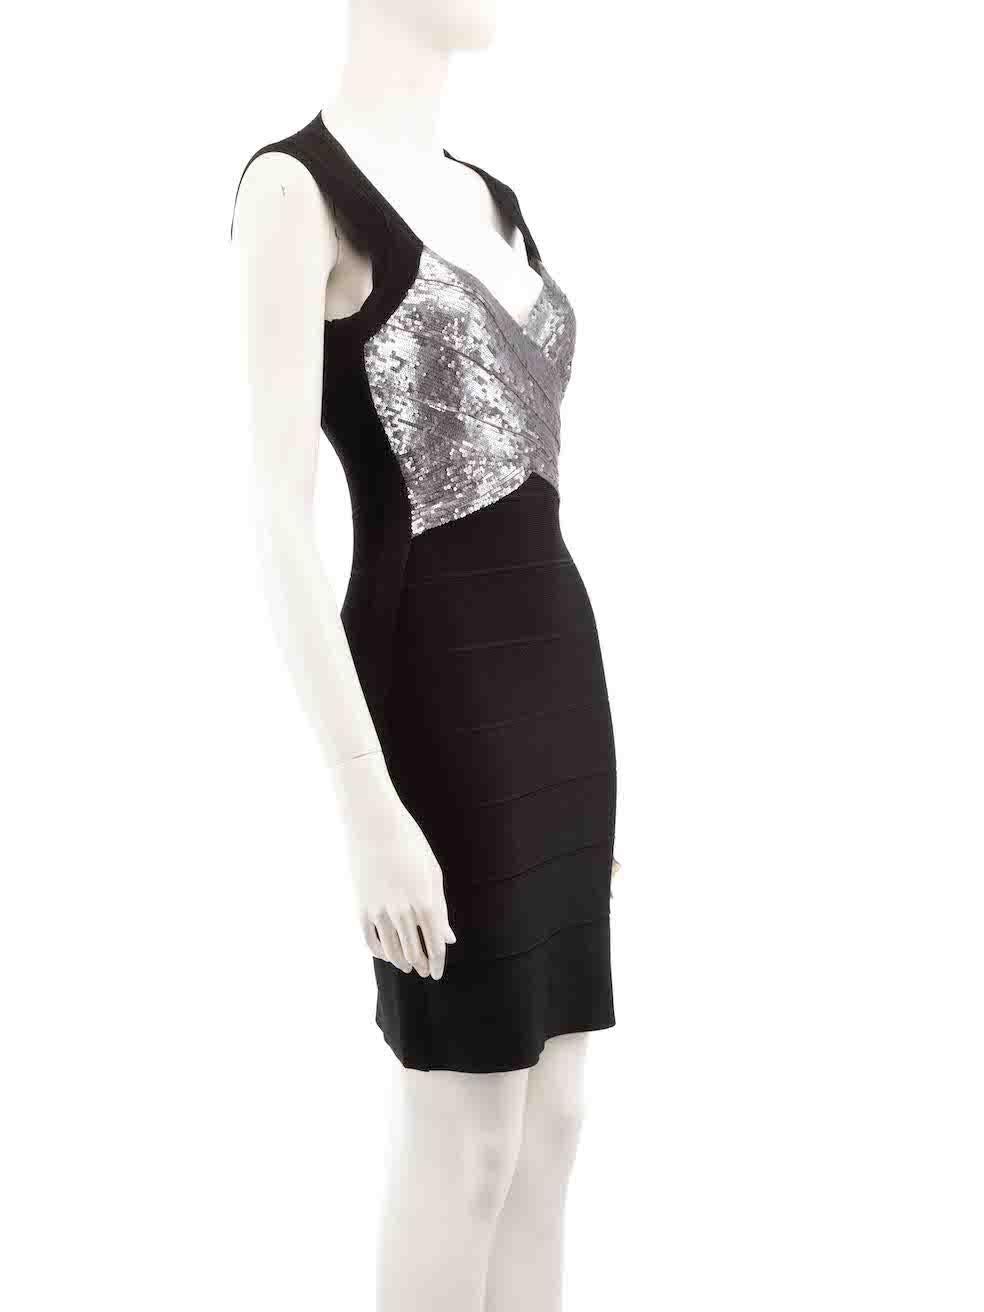 CONDITION is Good. General wear to dress is evident. Moderate signs of wear to the front with pilling and there are missing sequins to the embellishment on this used Herve Leger designer resale item.
 
 
 
 Details
 
 
 Black
 
 Rayon
 
 Bodycon